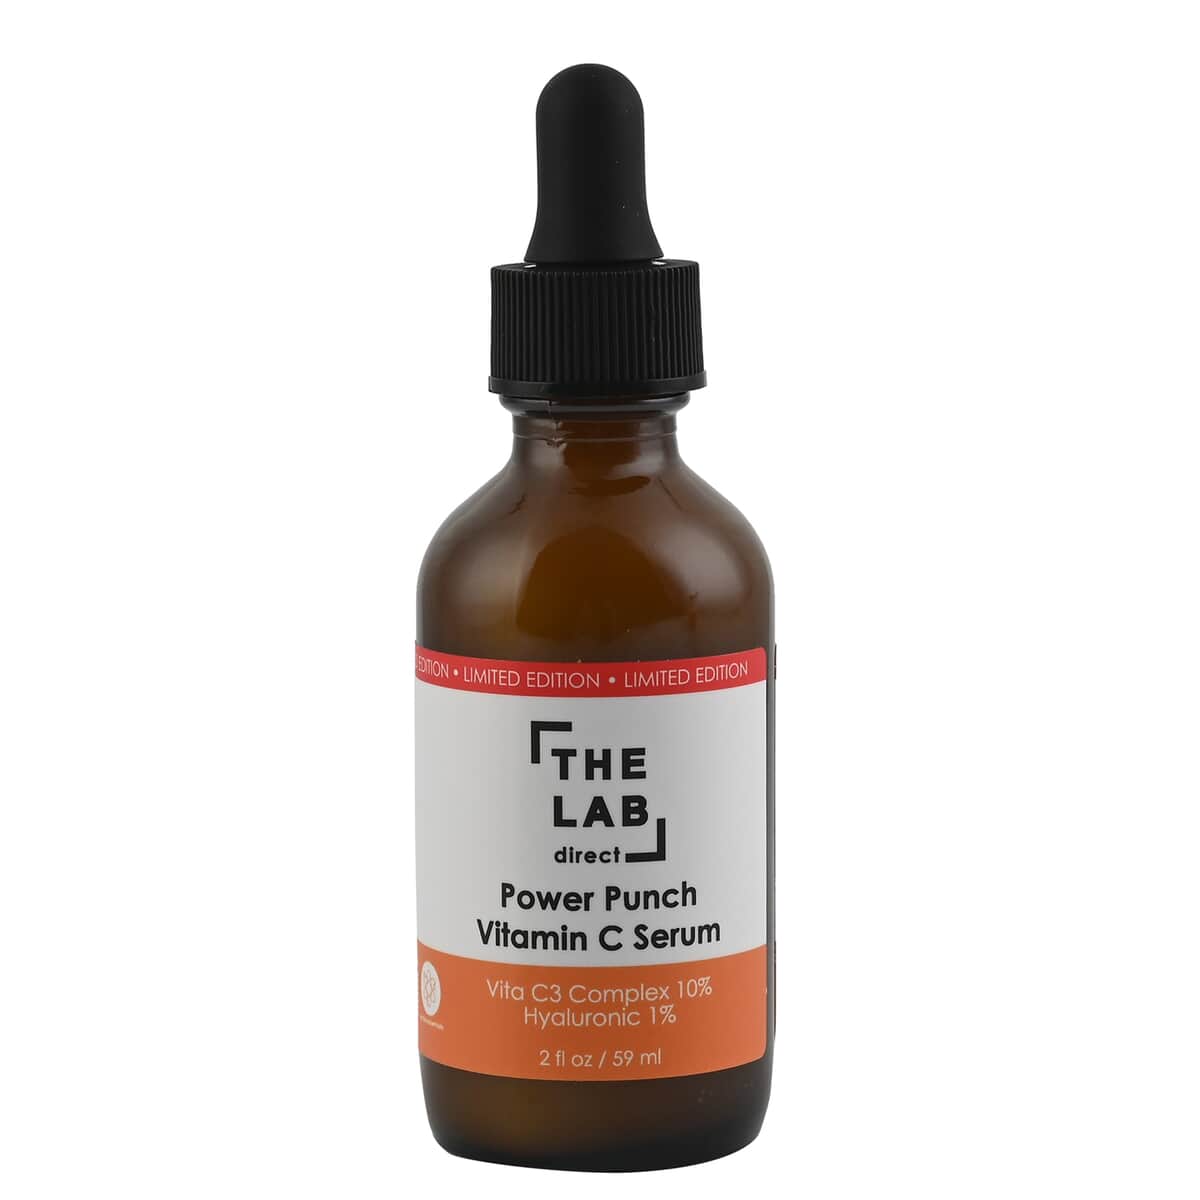 The Lab Direct - Power Punch Vitamin C Serum 2oz image number 0